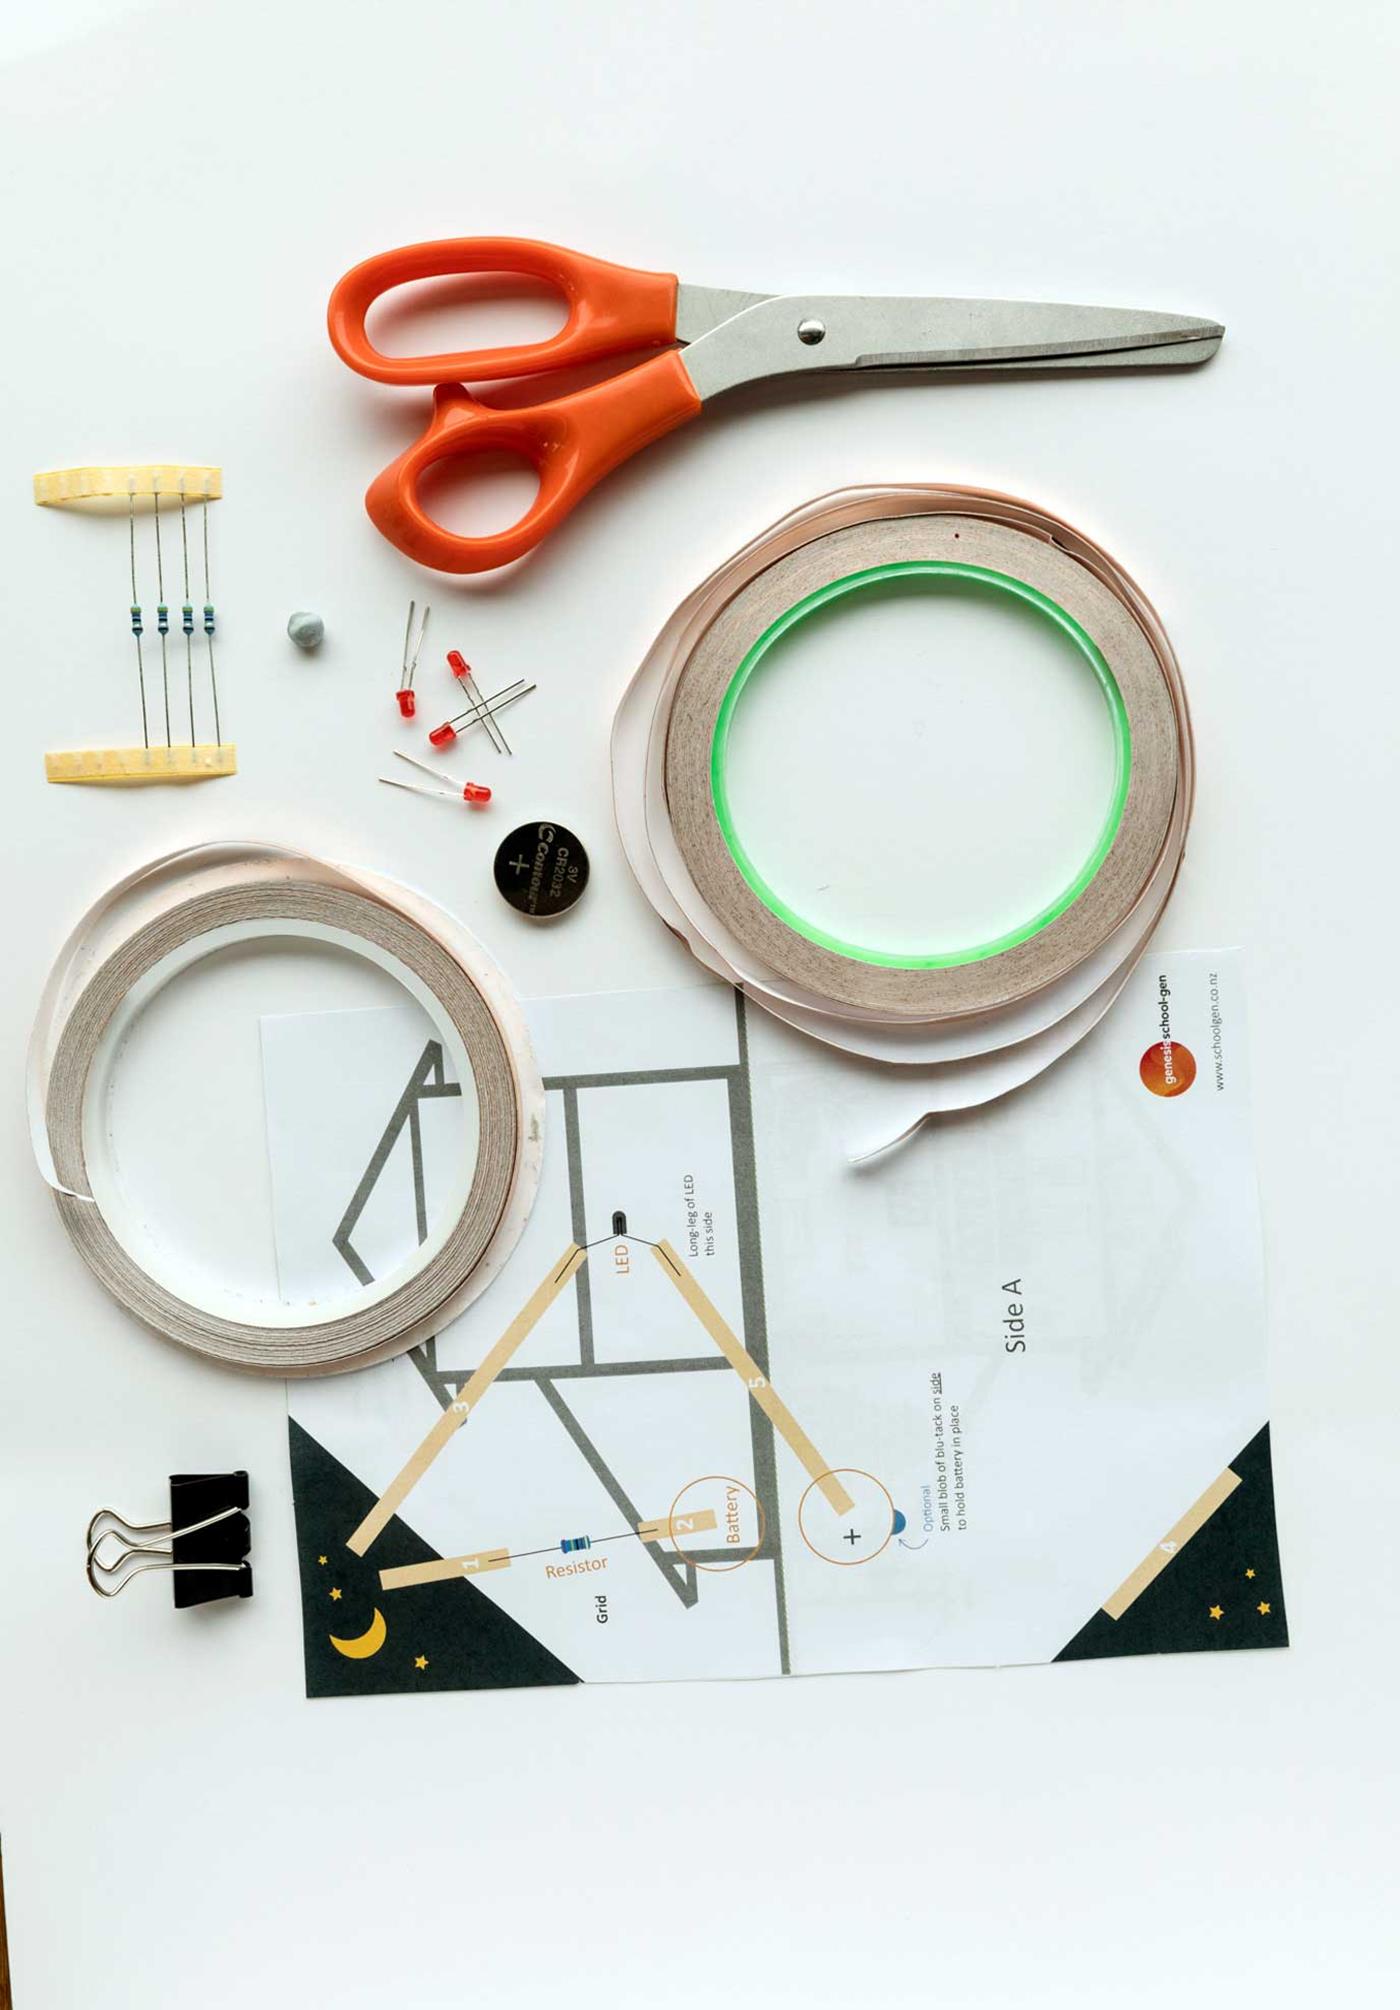 Aerial view of equipment required to make a paper circuit house